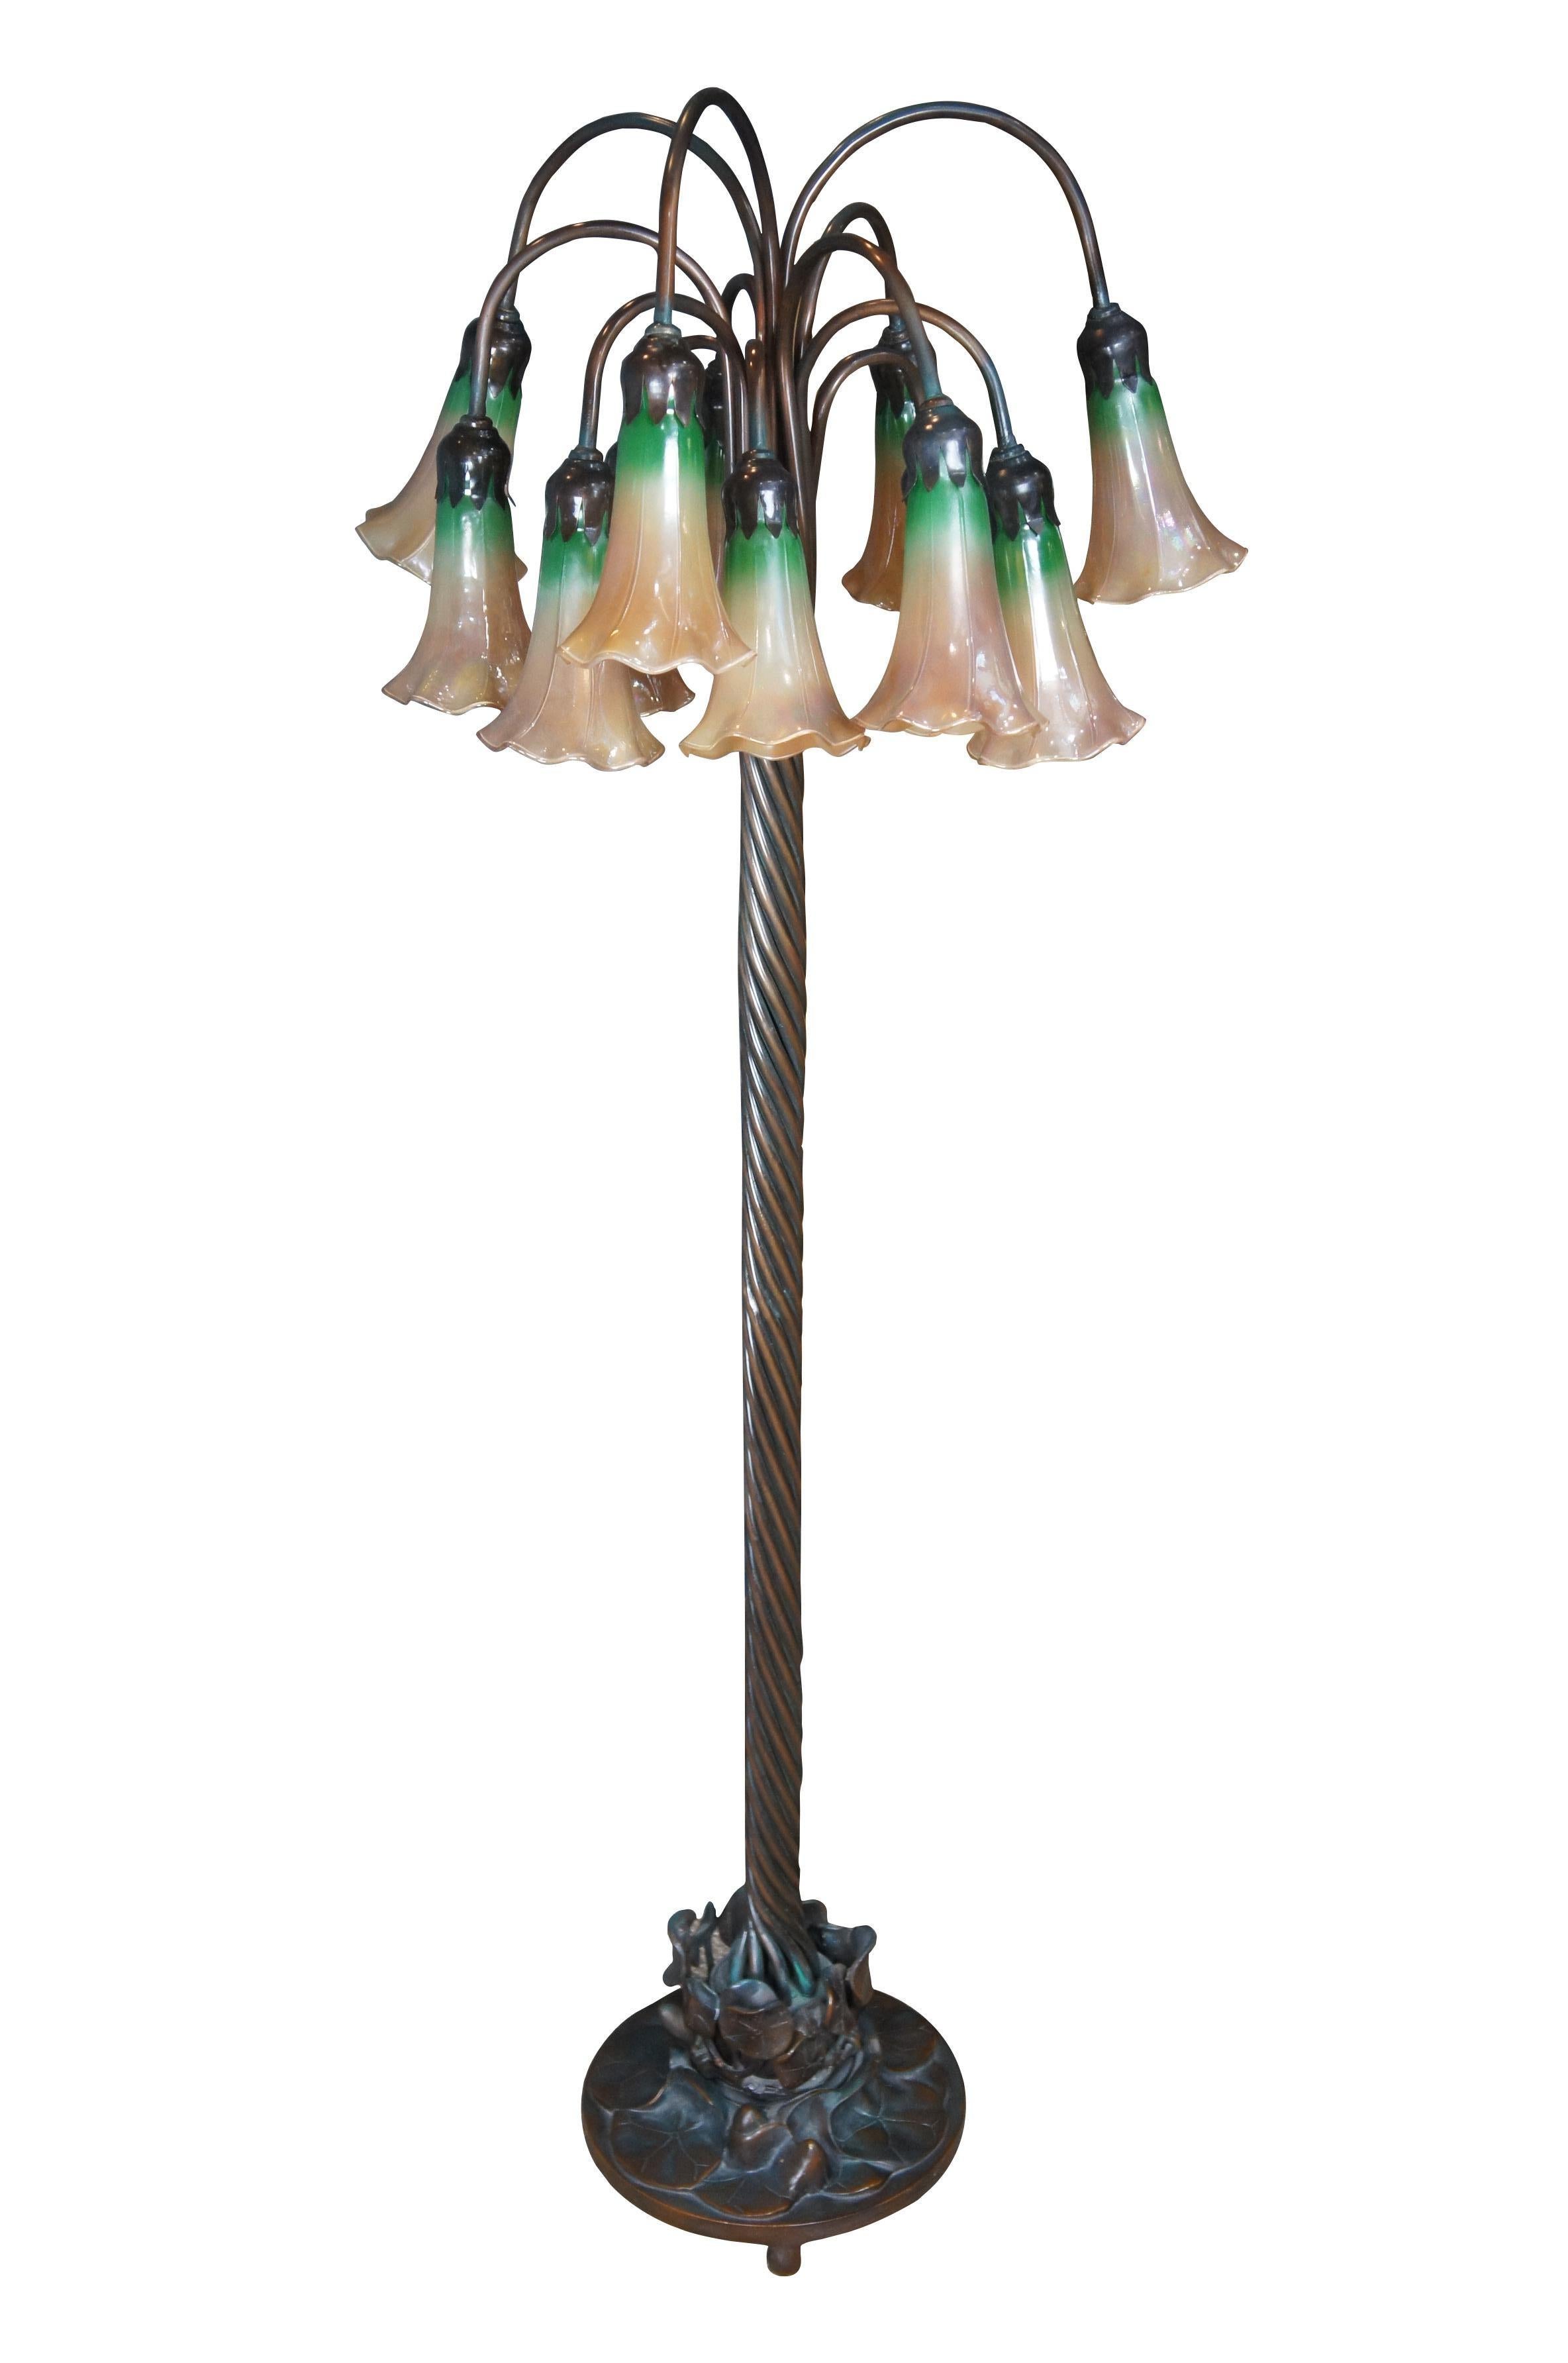 Vintage Tiffany style heavy bronze floor lamp featuring Art Nouveau styling with twisted column and lily pad base supporting twelve floral tulip glass shades.  Marked kembia astm 88-k.  Lamp includes two extra shades.

Dimensions:
54